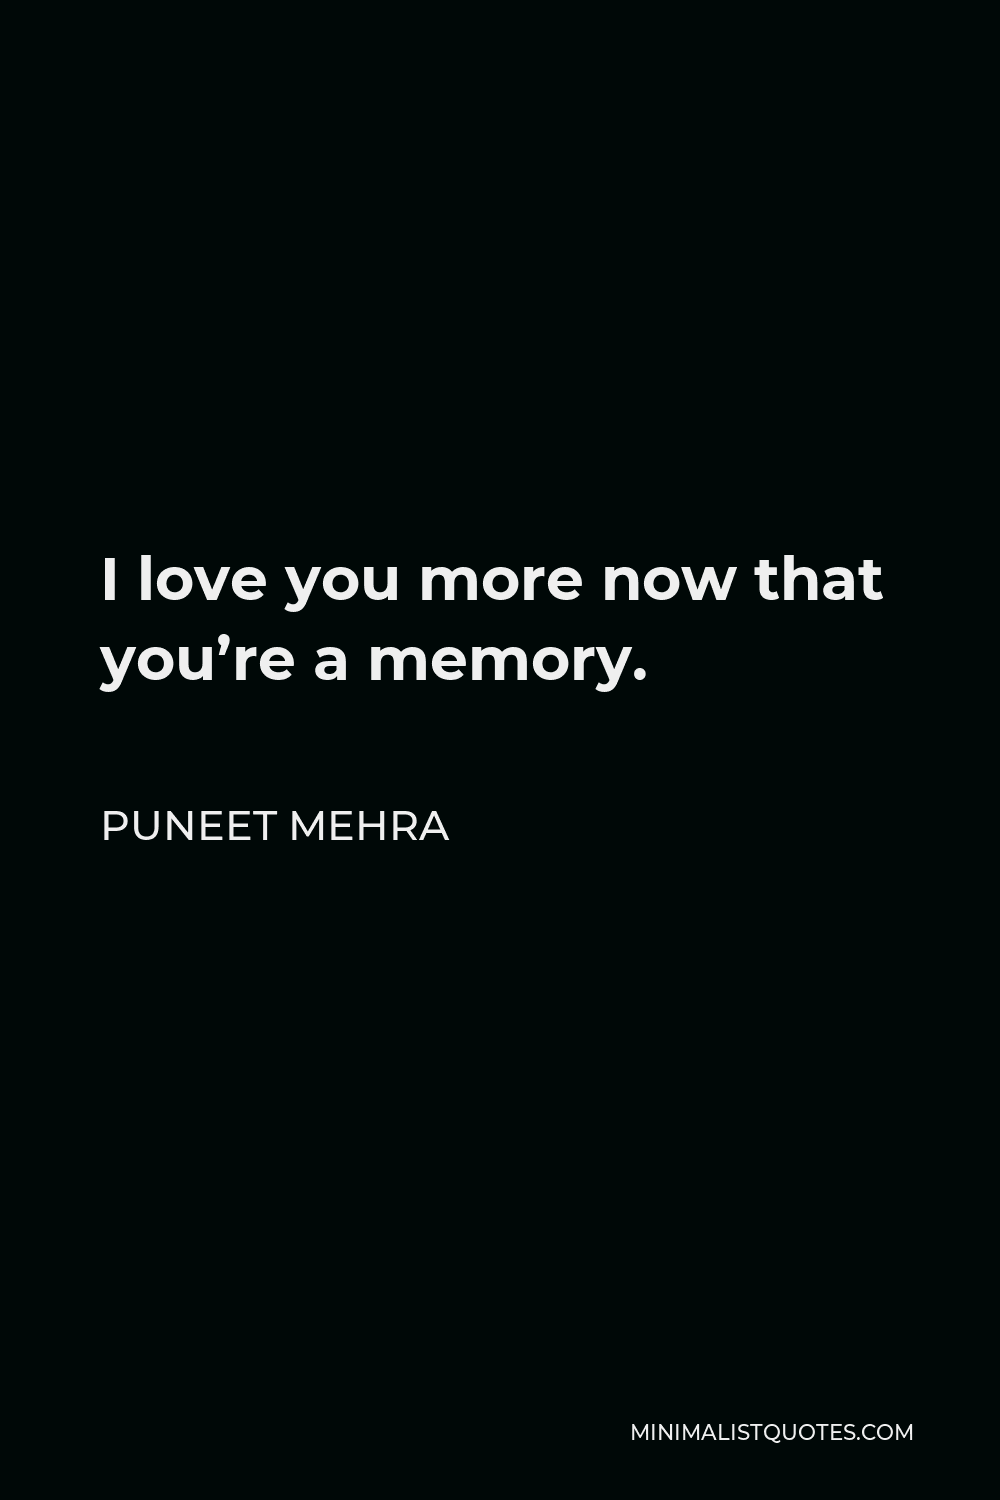 Puneet Mehra Quote - I love you more now that you’re a memory.